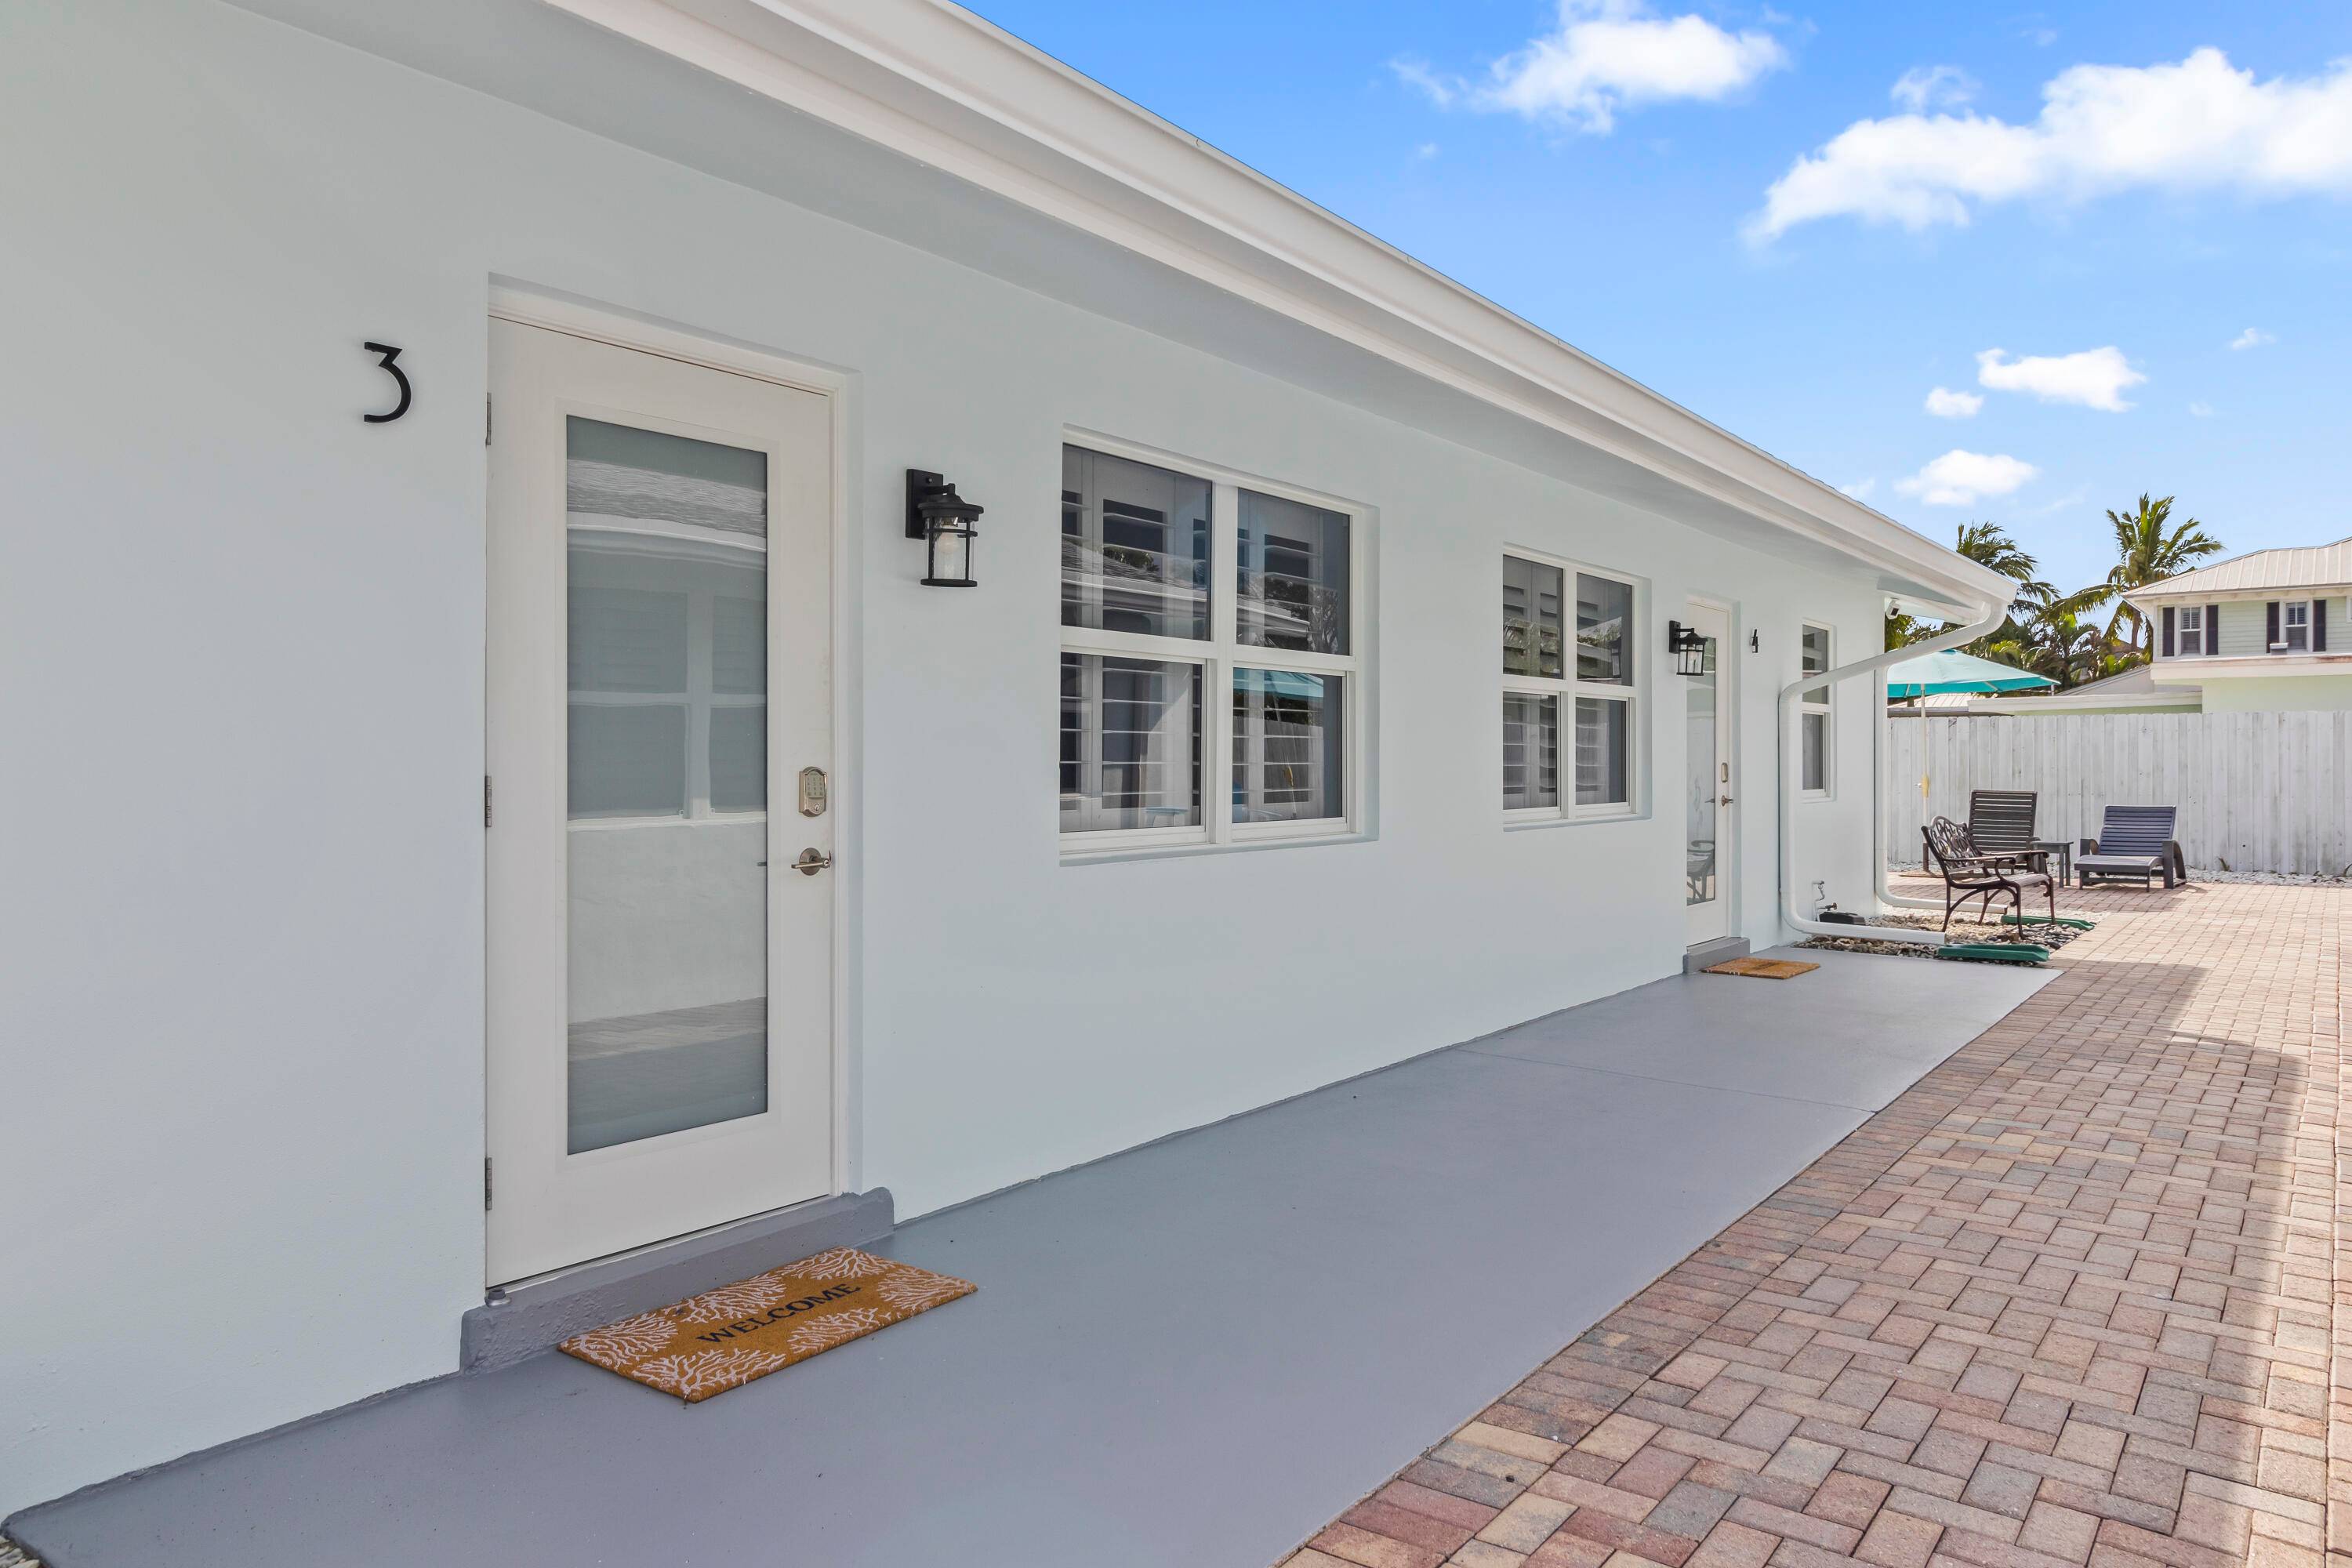 Are you searching for a beautiful two bedroom one bathroom newly remodeled and furnished rental with luxury finishes and and a relaxed coastal charm ?